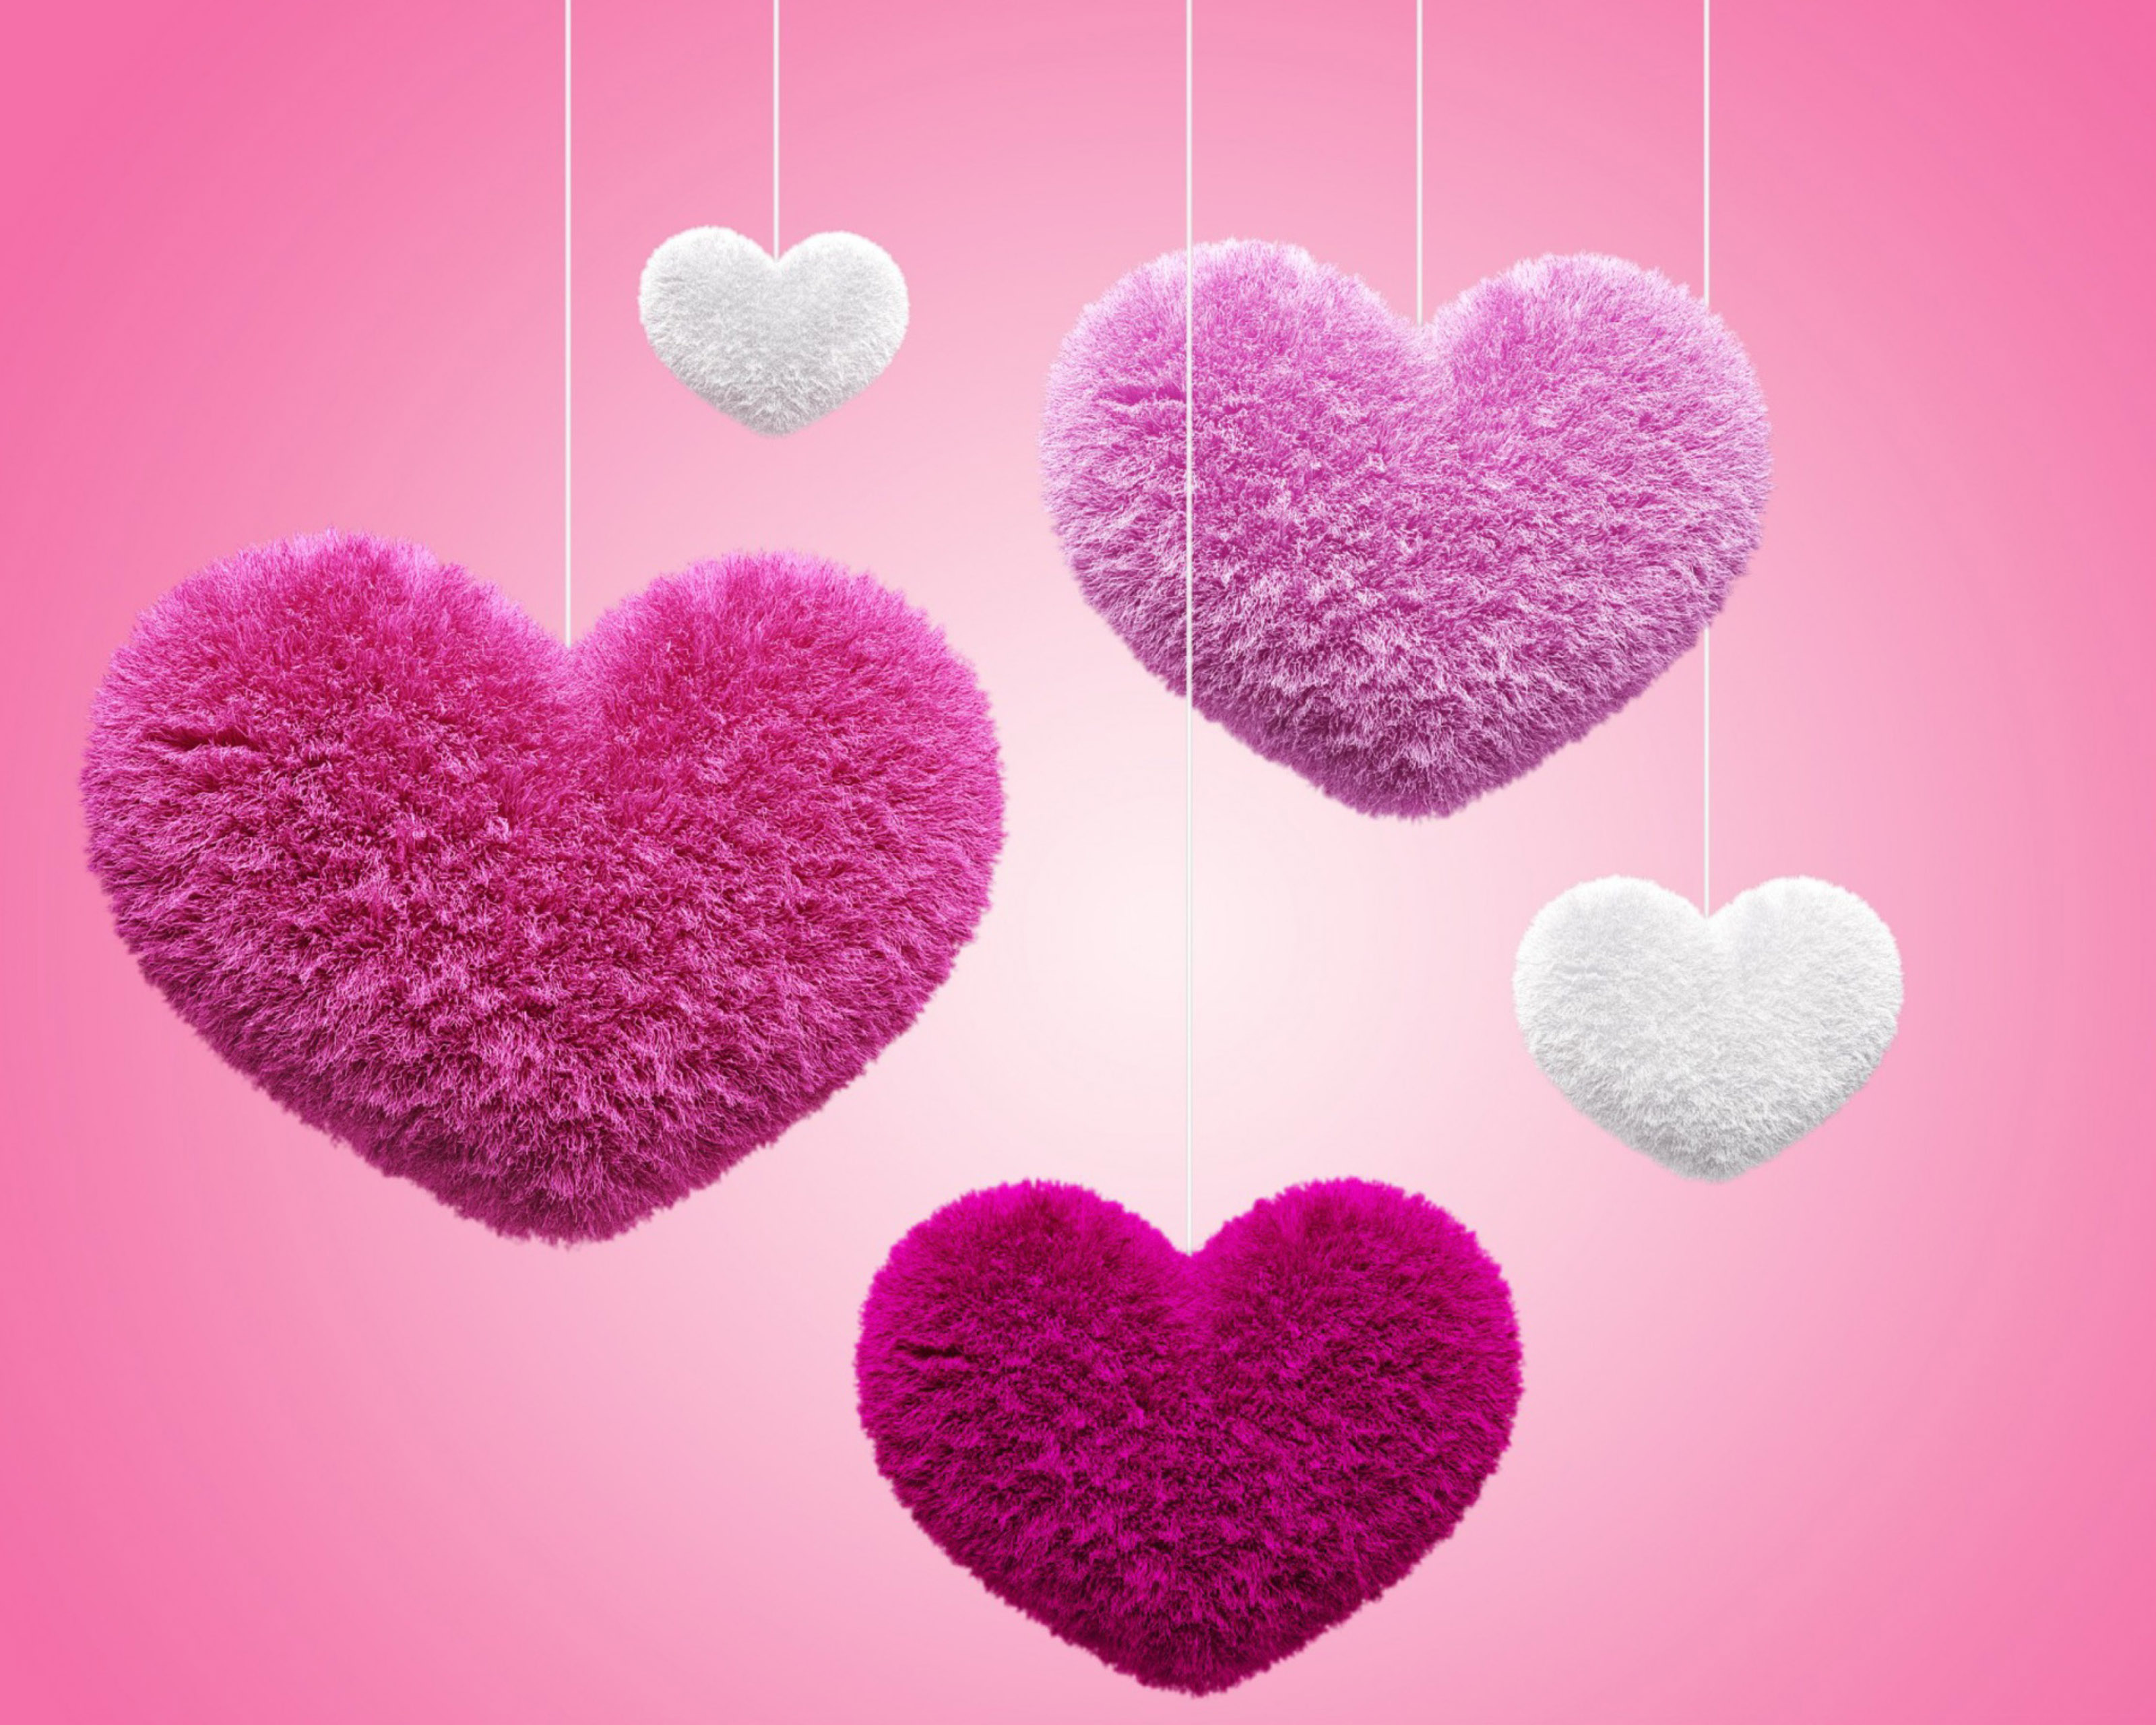 hd wallpapers for lenovo k3 note,heart,pink,love,valentine's day,magenta